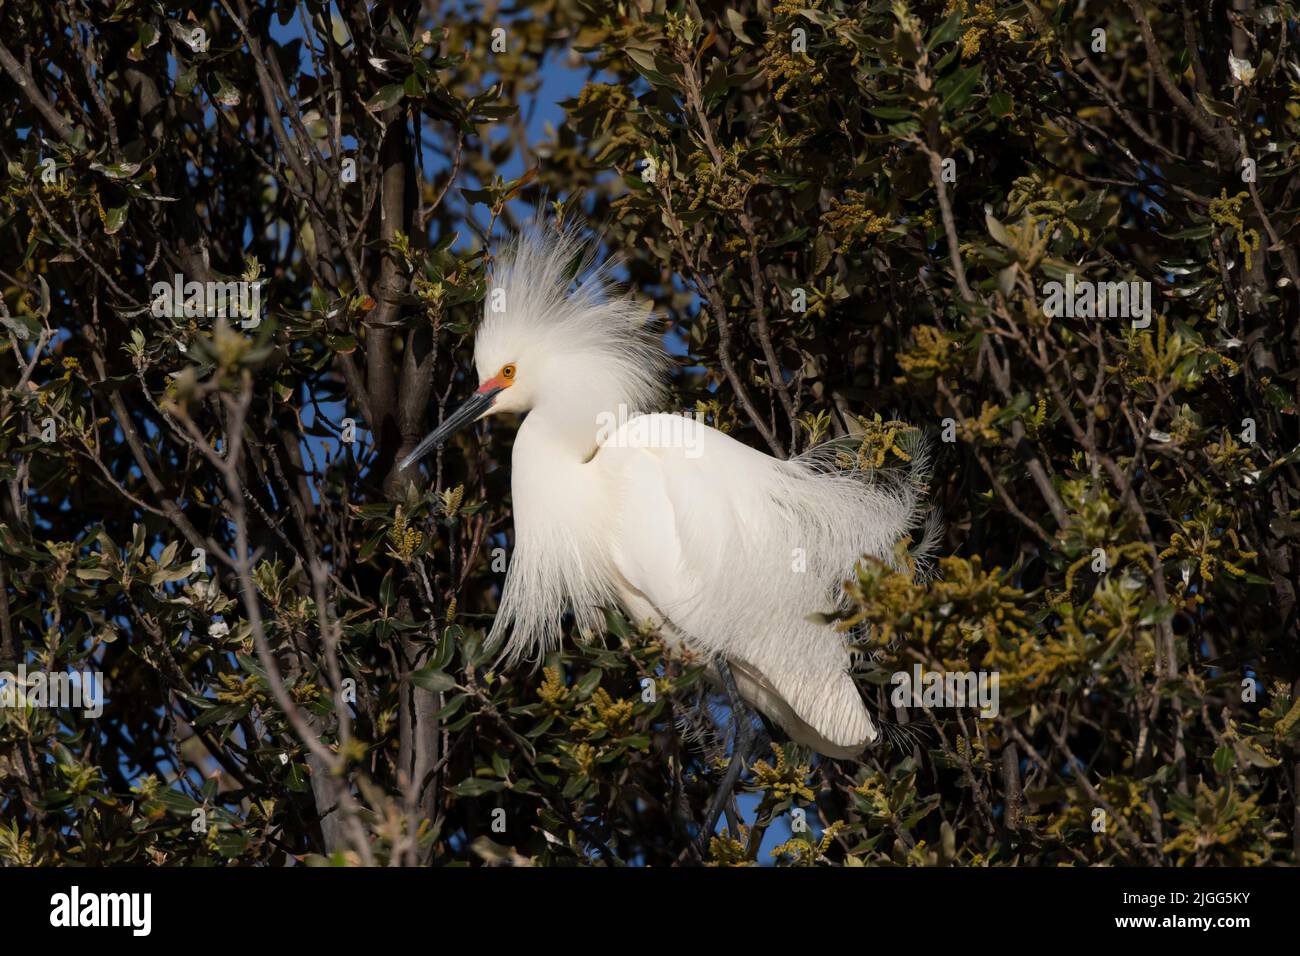 Adult Snowy Egret, Egretta thula, perched in a colonial nesting area in California's San Joaquin Valley. Stock Photo